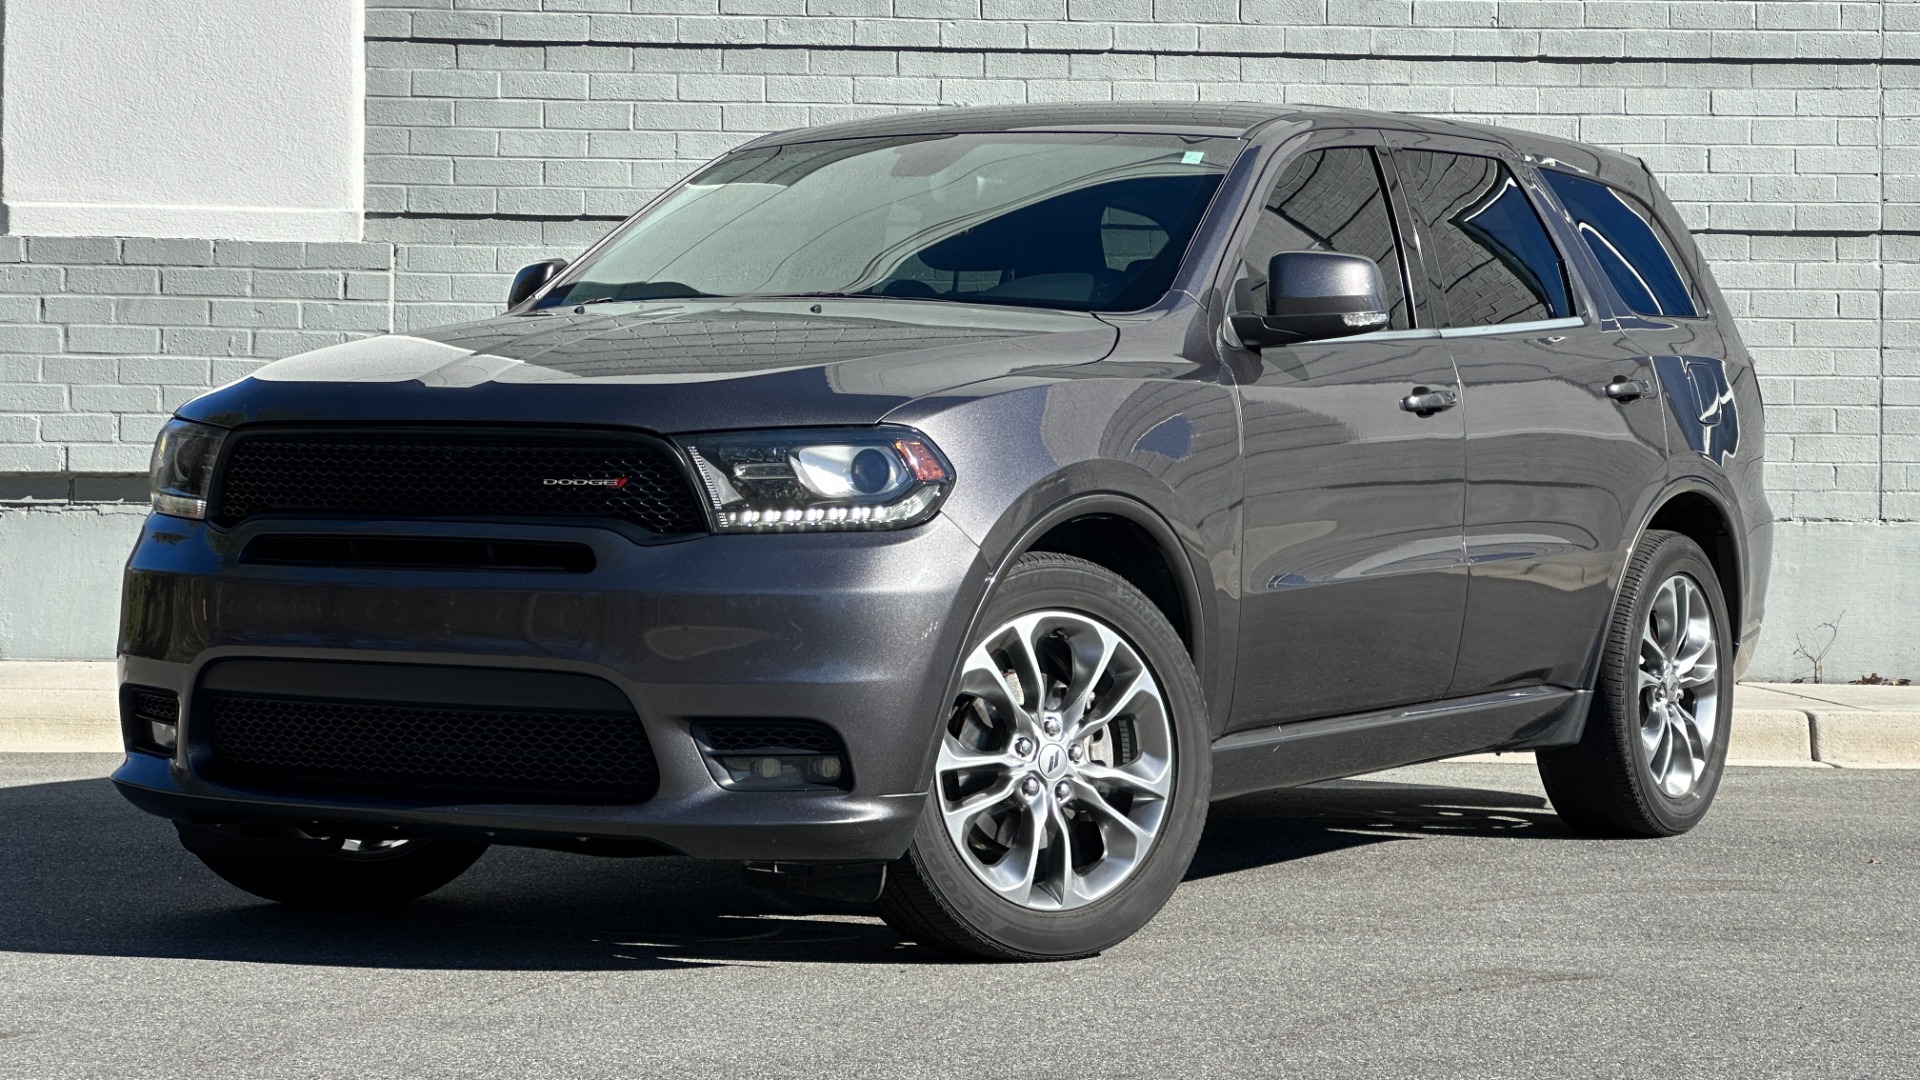 Used 2020 Dodge Durango GT PLUS / HEATED SEATS / SUEDE LEATHER / 3 ROW SEATING / REMOTE START for sale $27,995 at Formula Imports in Charlotte NC 28227 1